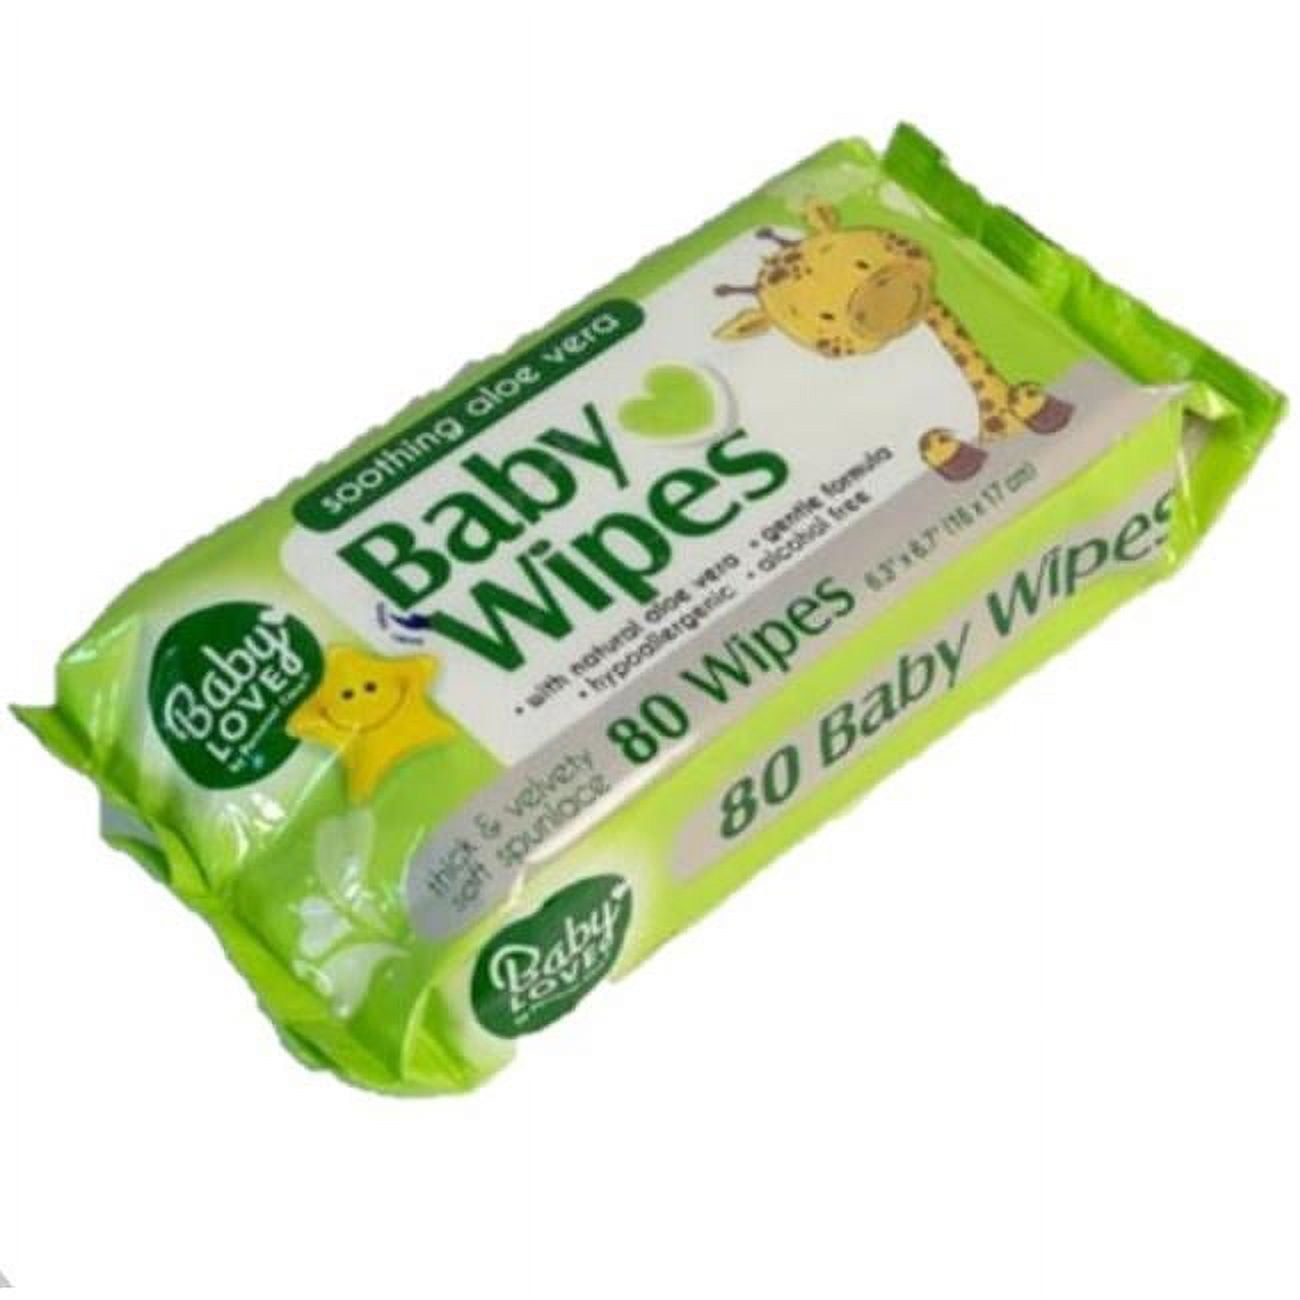 Love&Green wipes Liniment, baby wipes